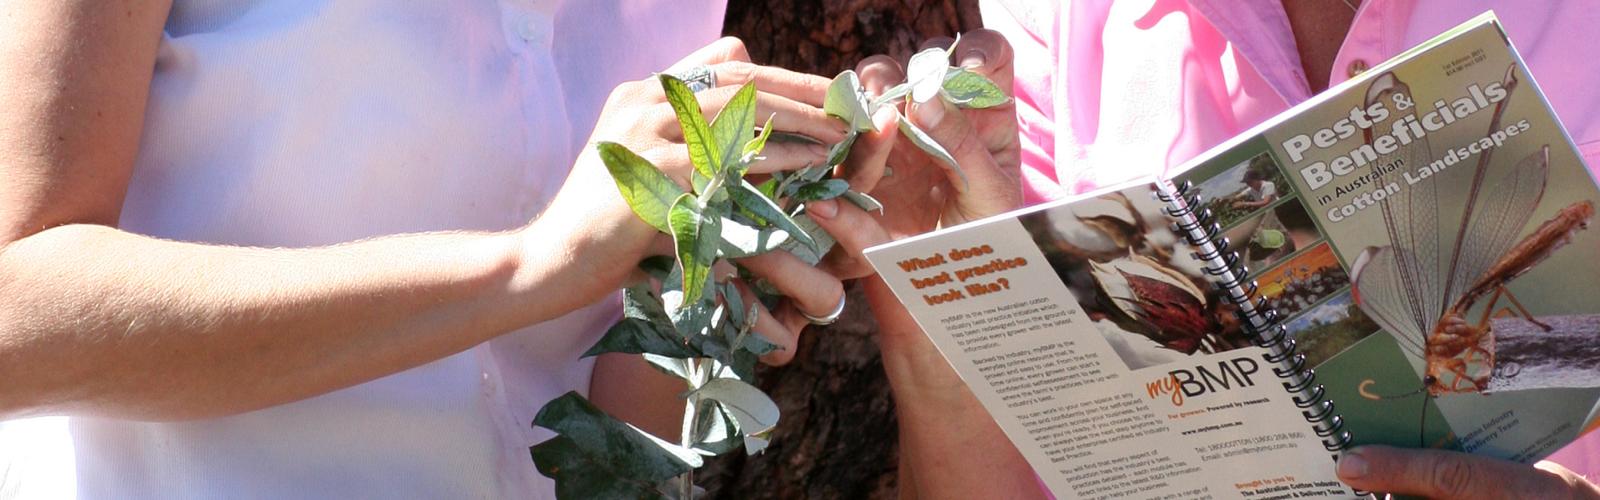 Two people comparing a plant to pests publication